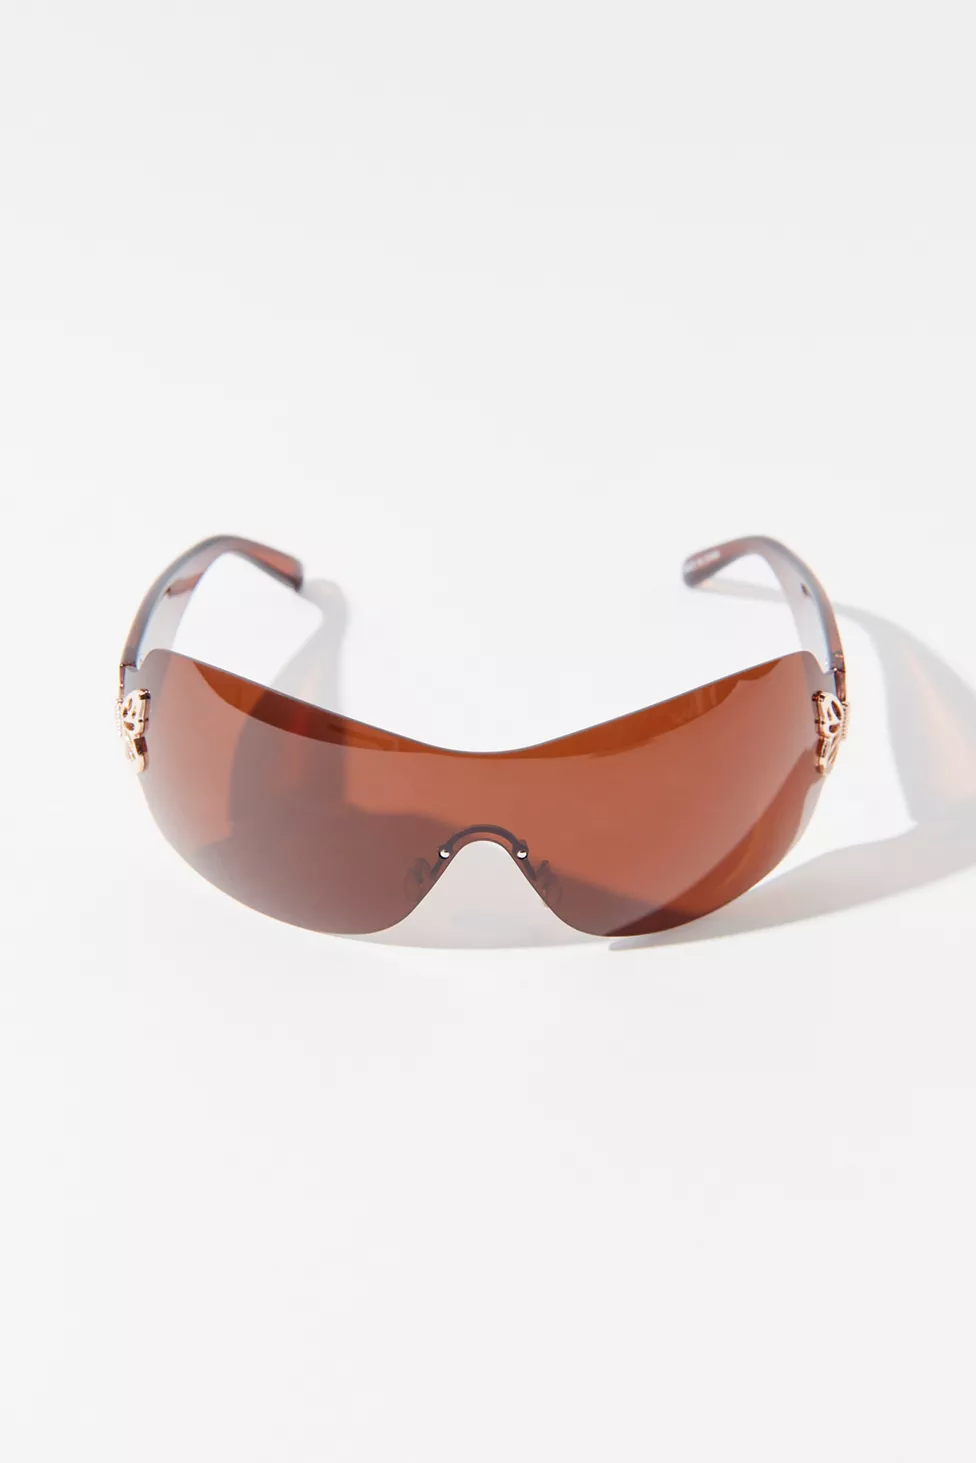 urbanoutfitters.com | Cher Butterfly Shield Sunglasse